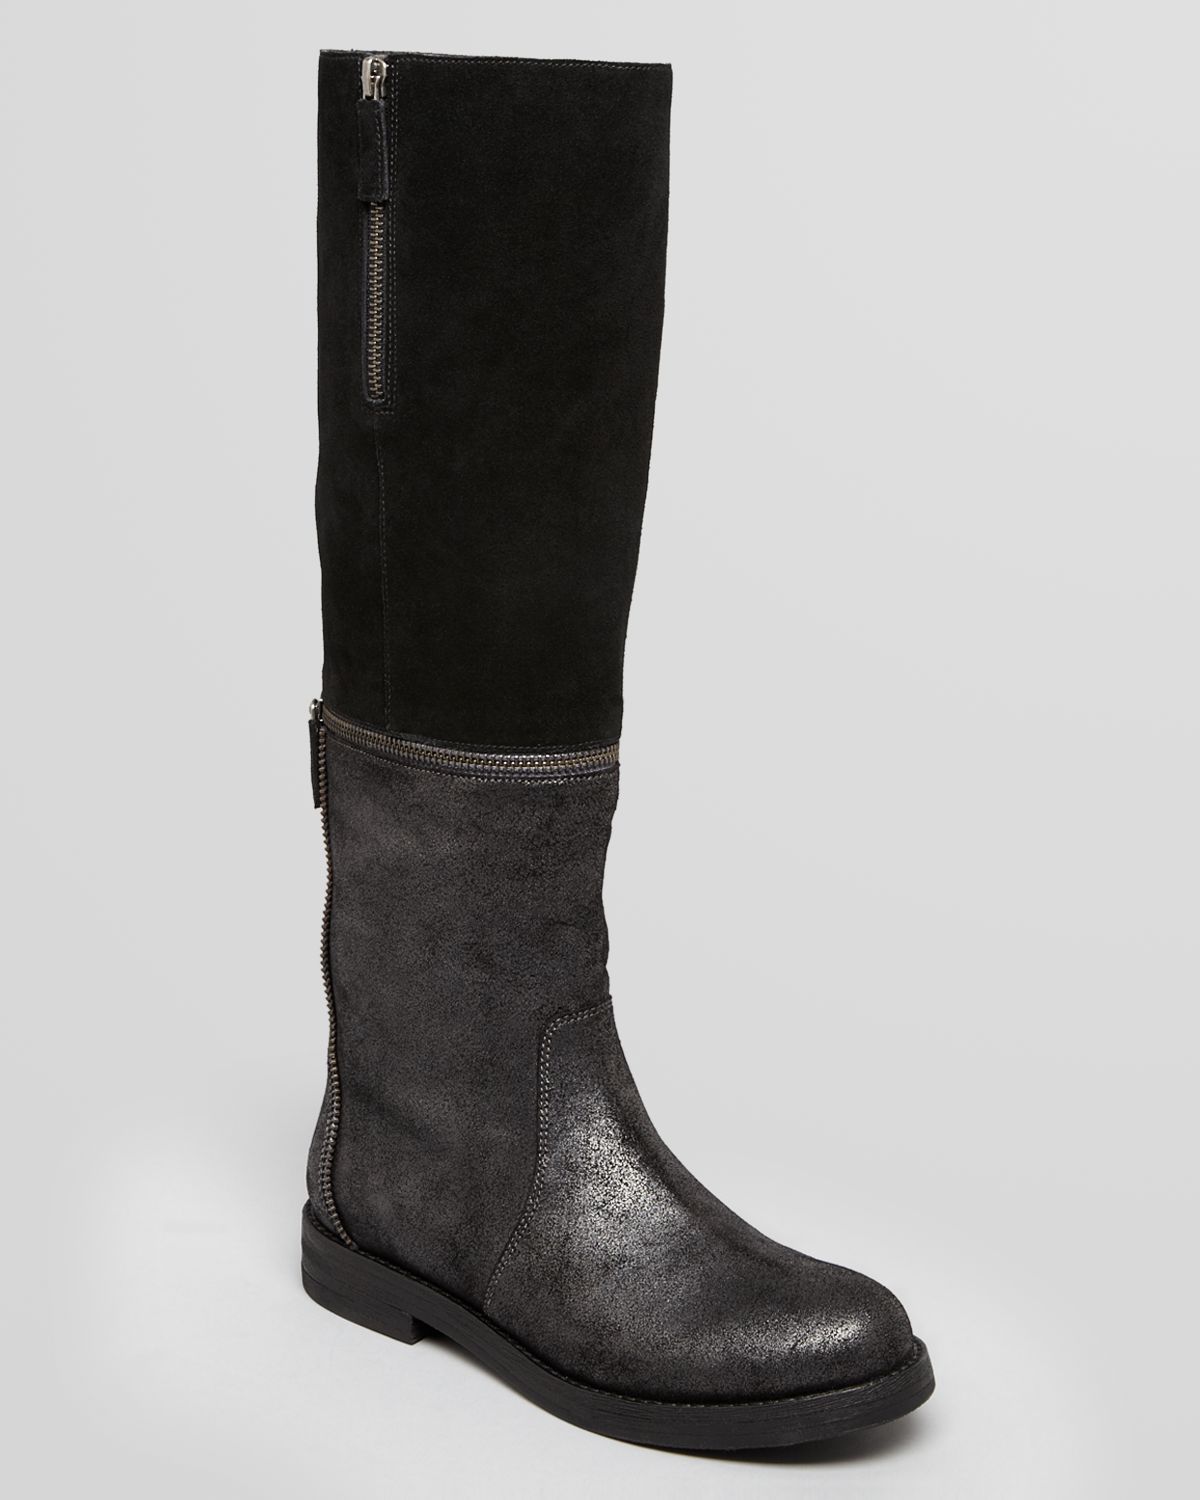 Eileen Fisher Boots Switch Convertible in Black (Black